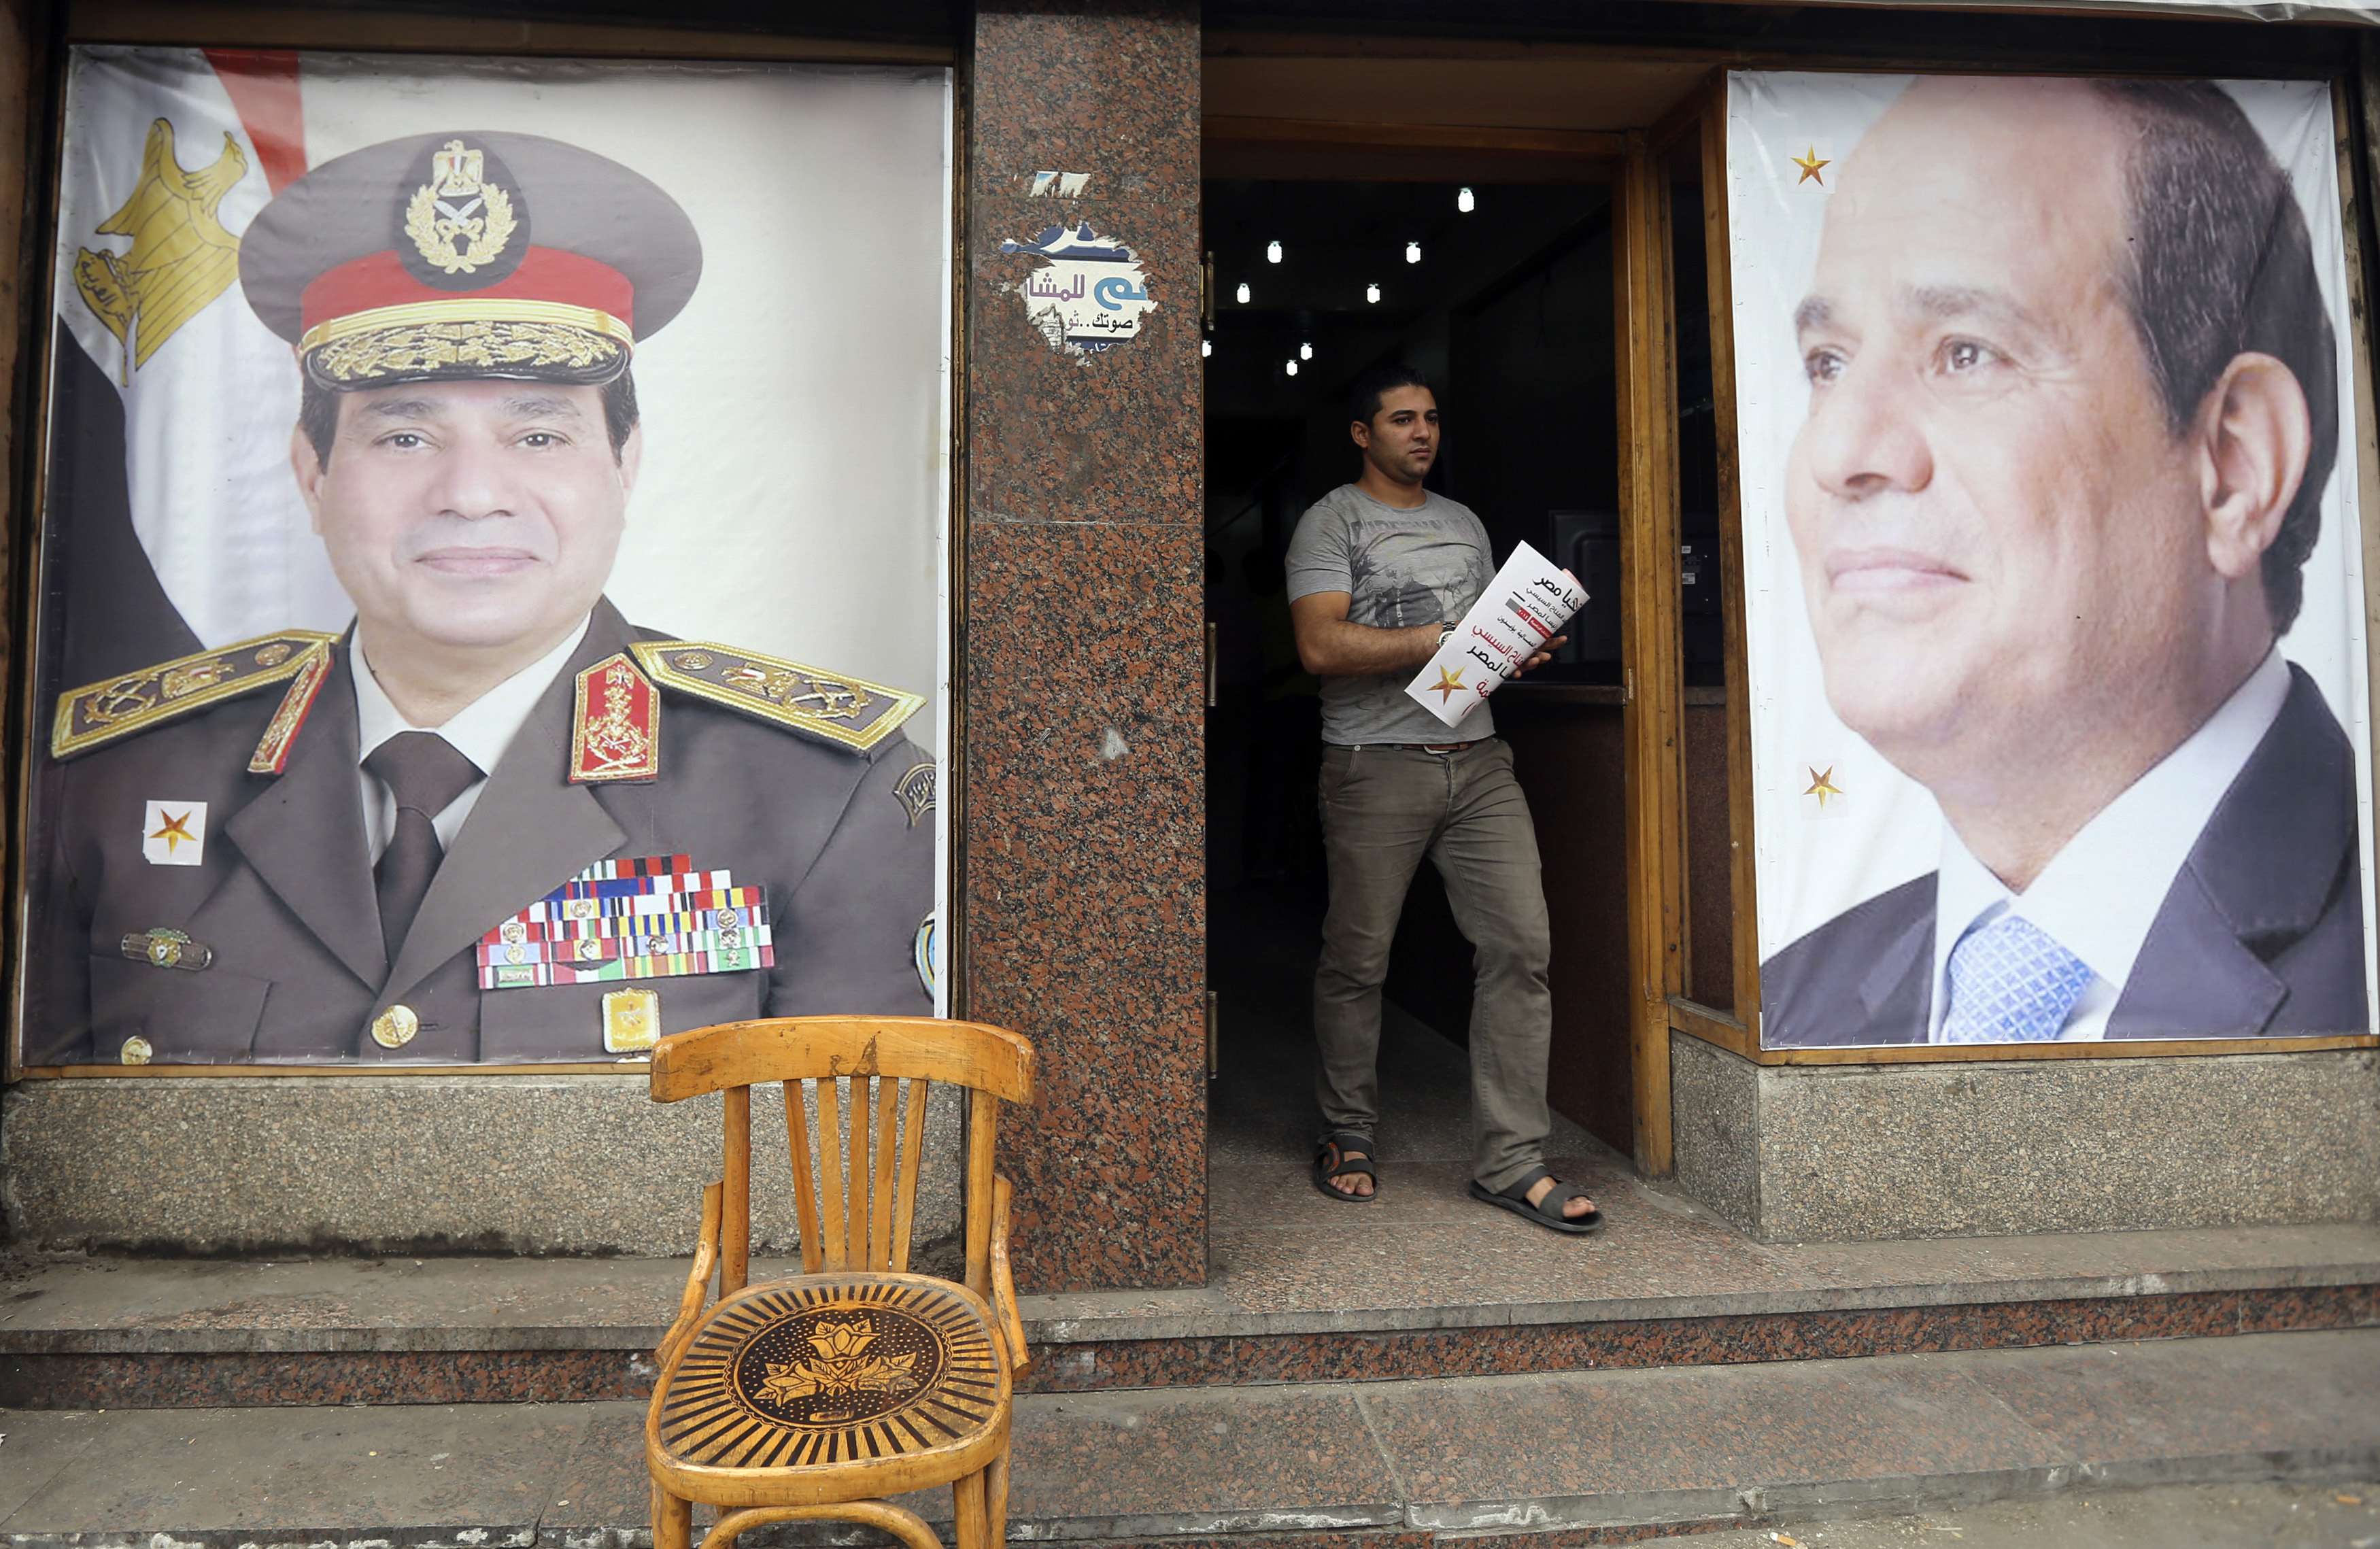 A volunteer leaves the headquarters of former Egyptian army chief Abdel Fattah al-Sisi near his poster in El Gamaliya district, where he spent his childhood, in the old Islamic area of Cairo May 9, 2014. As the Egyptian state presses its crackdown on the 